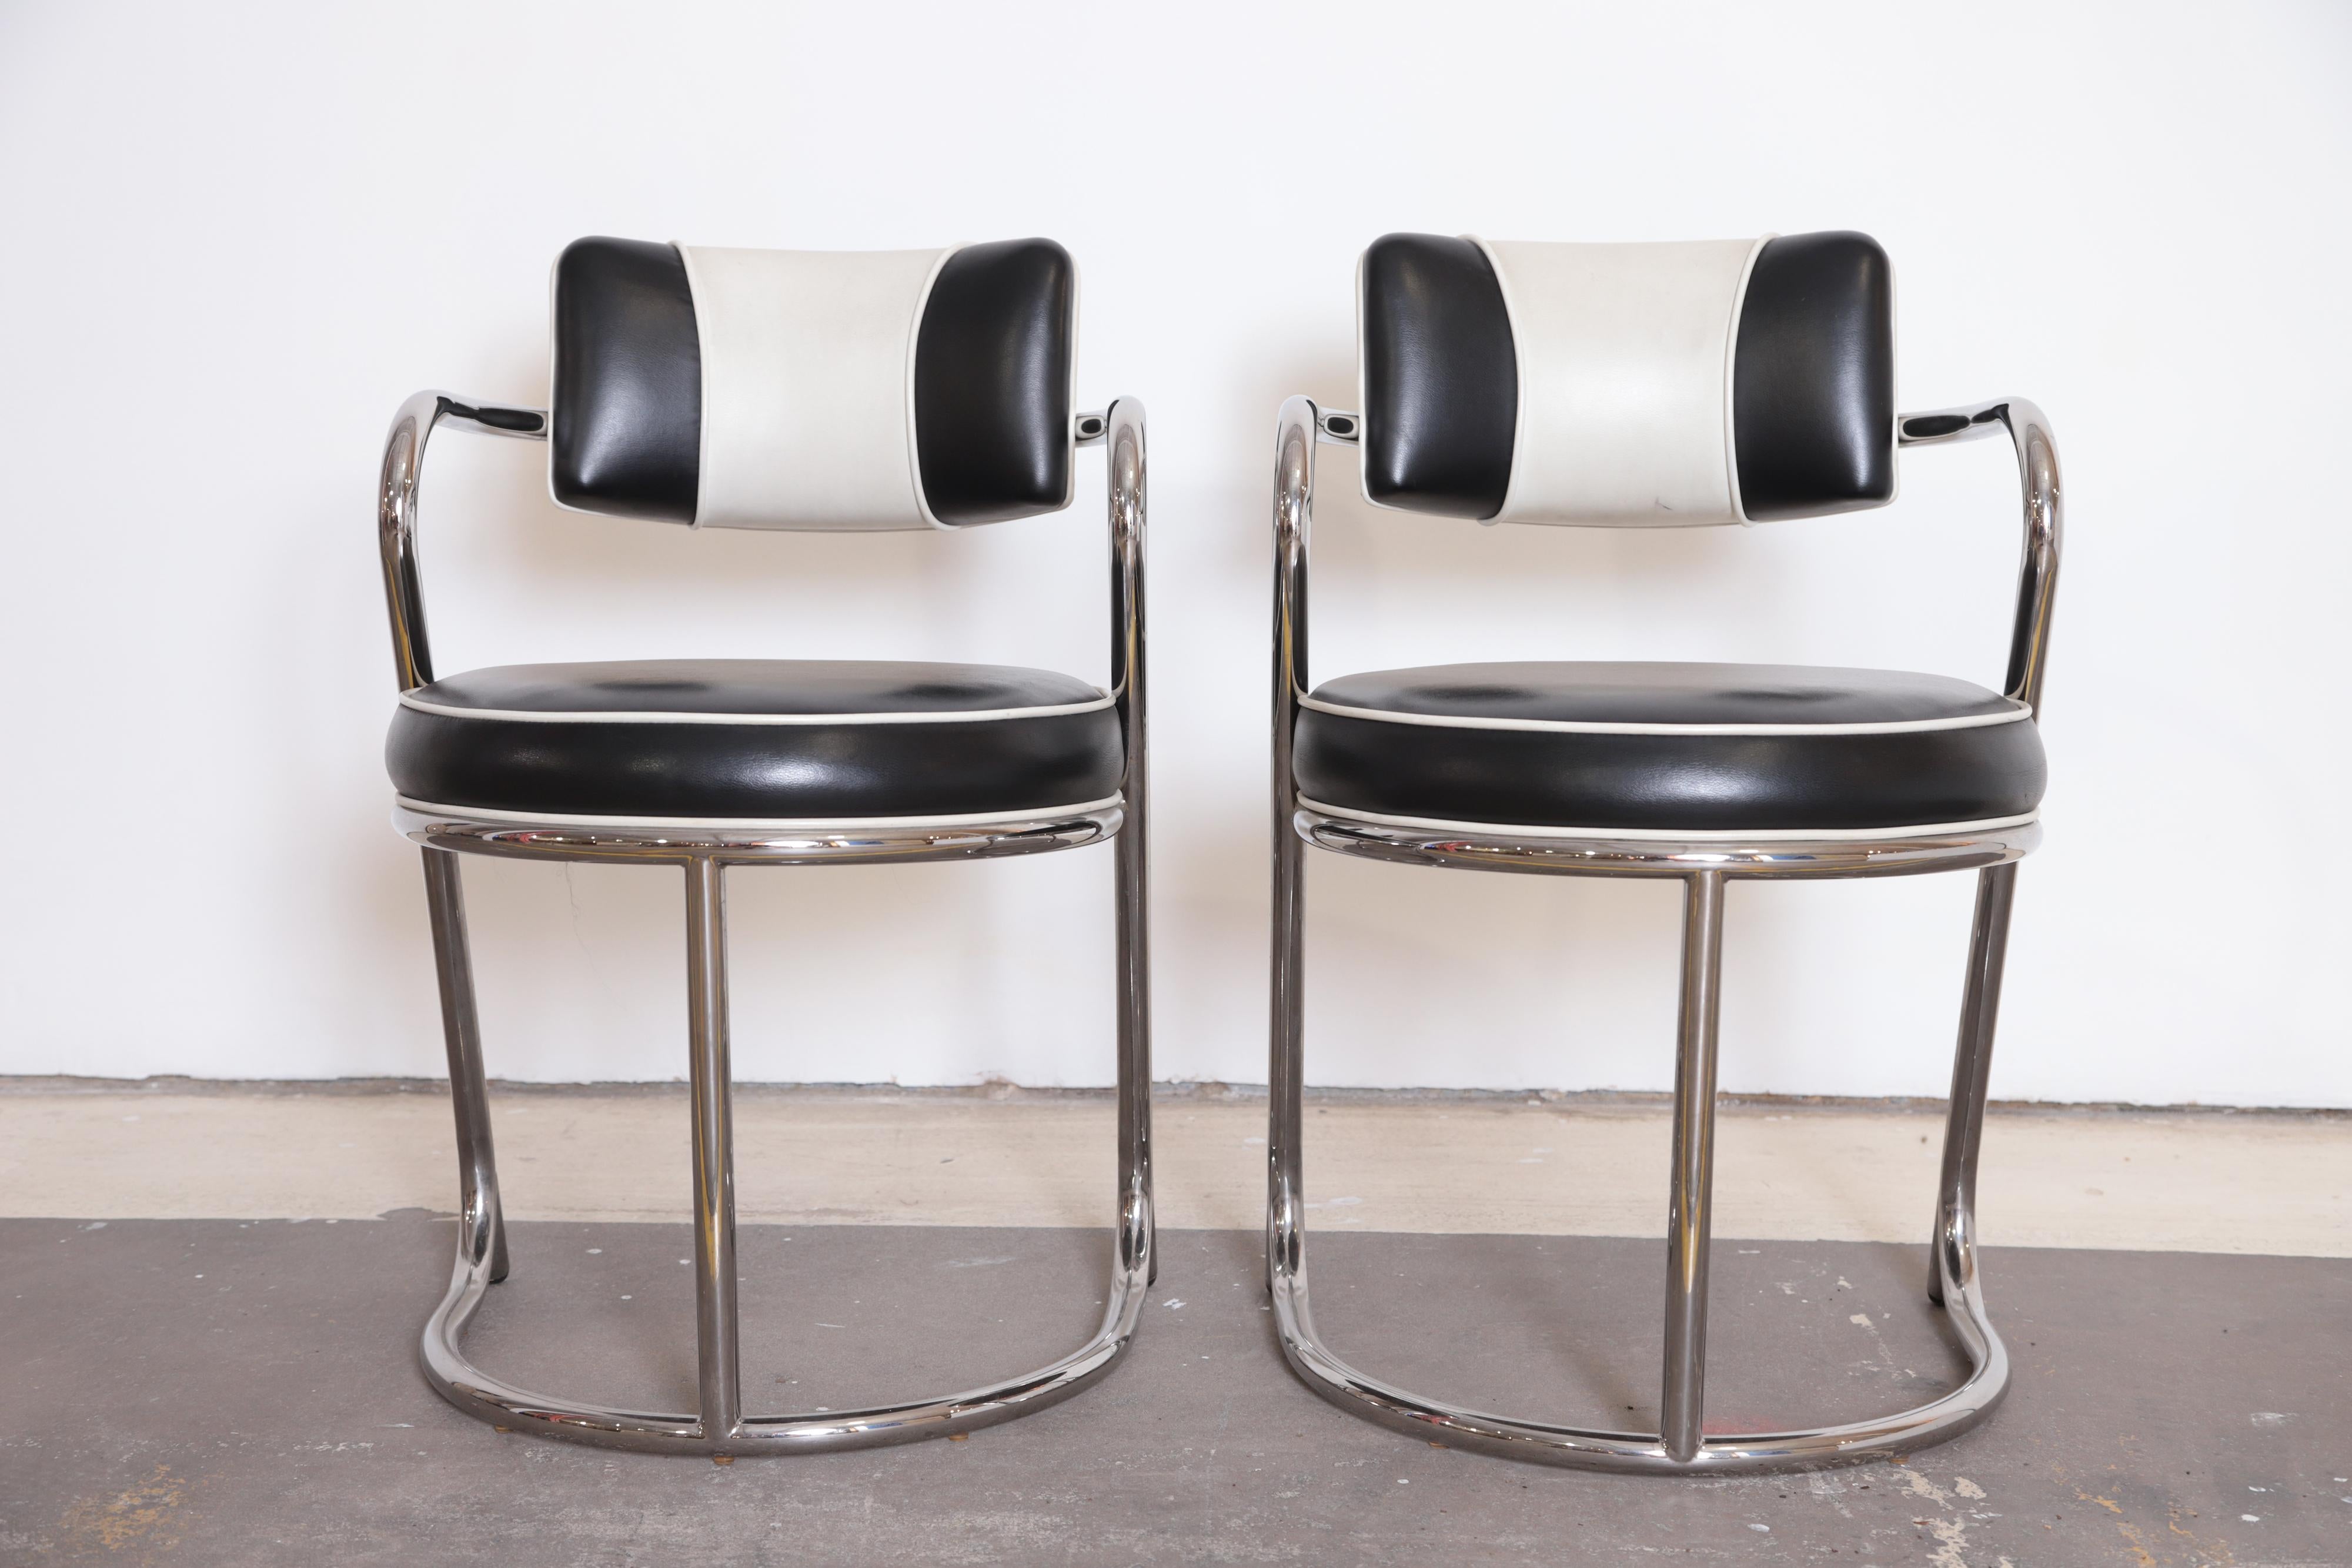 Machine Age Art Deco JAZZ armchairs manner of Donald Deskey for Royalchrome.

Pair of 1980s Art Deco Revival club chairs by JAZZ.
Tubular chrome and leatherette. 

These are very well-built.
 